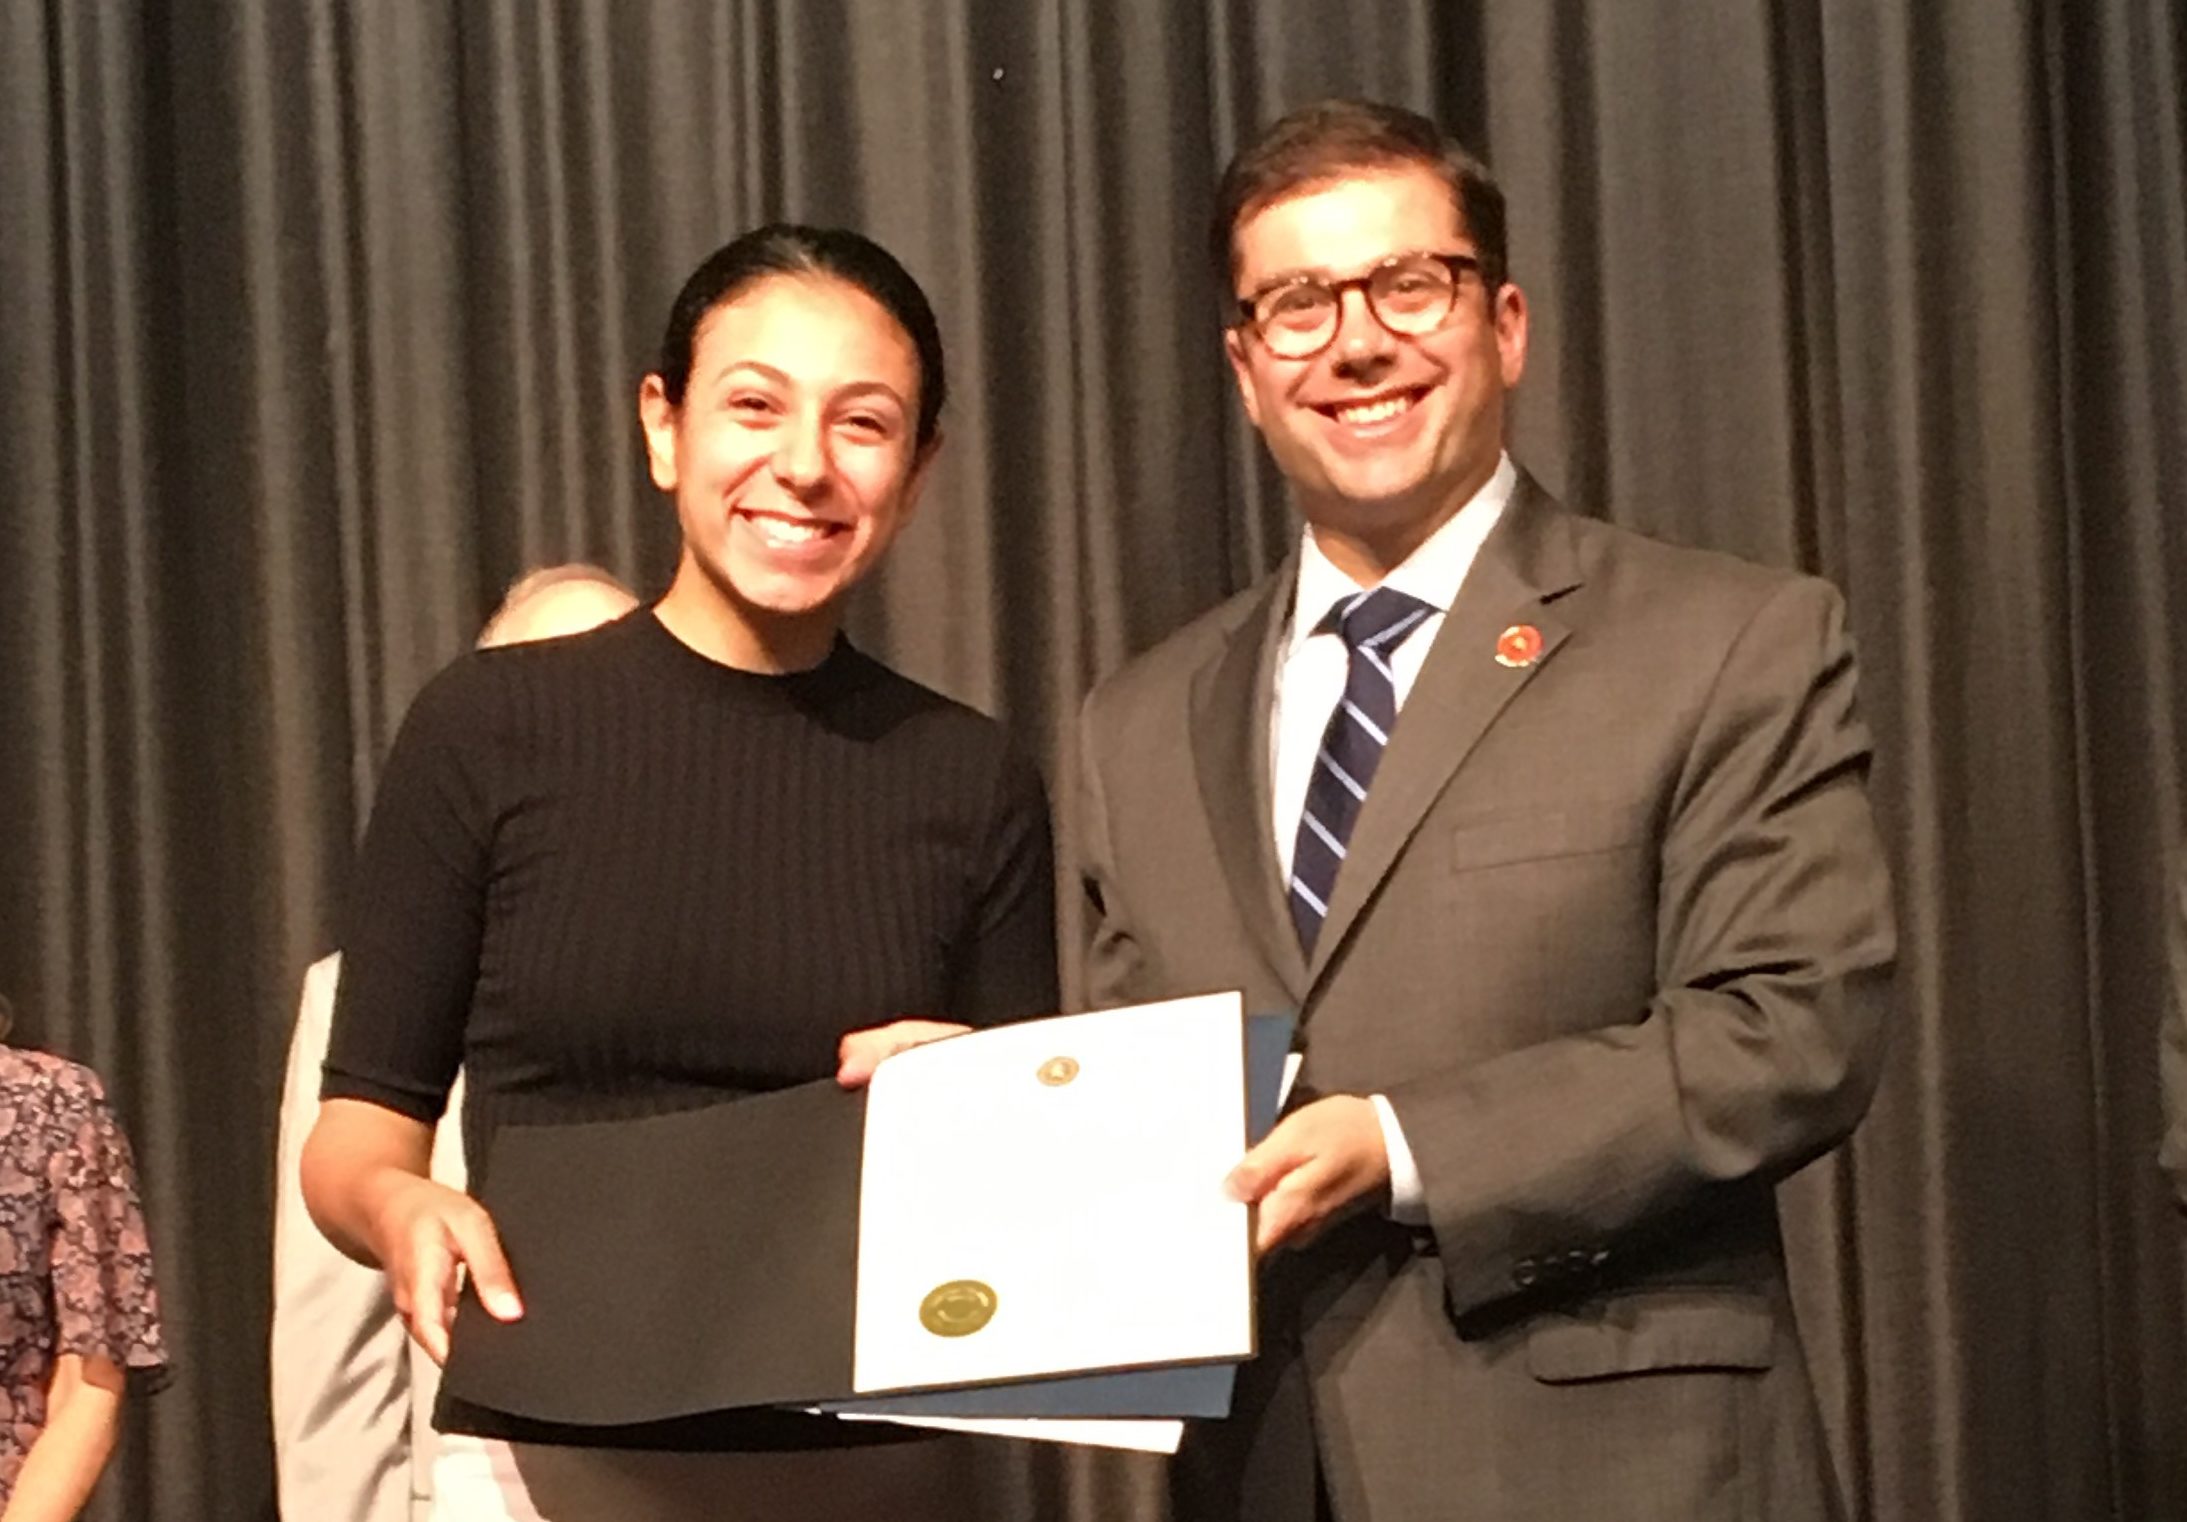 Nassau County Comptroller Jack Schnirman presents the Comptroller’s High School Innovation Award to Rebecca Yaminian at John L. Miller Great Neck North High School. (Photo courtesy of the Comptroller's office)